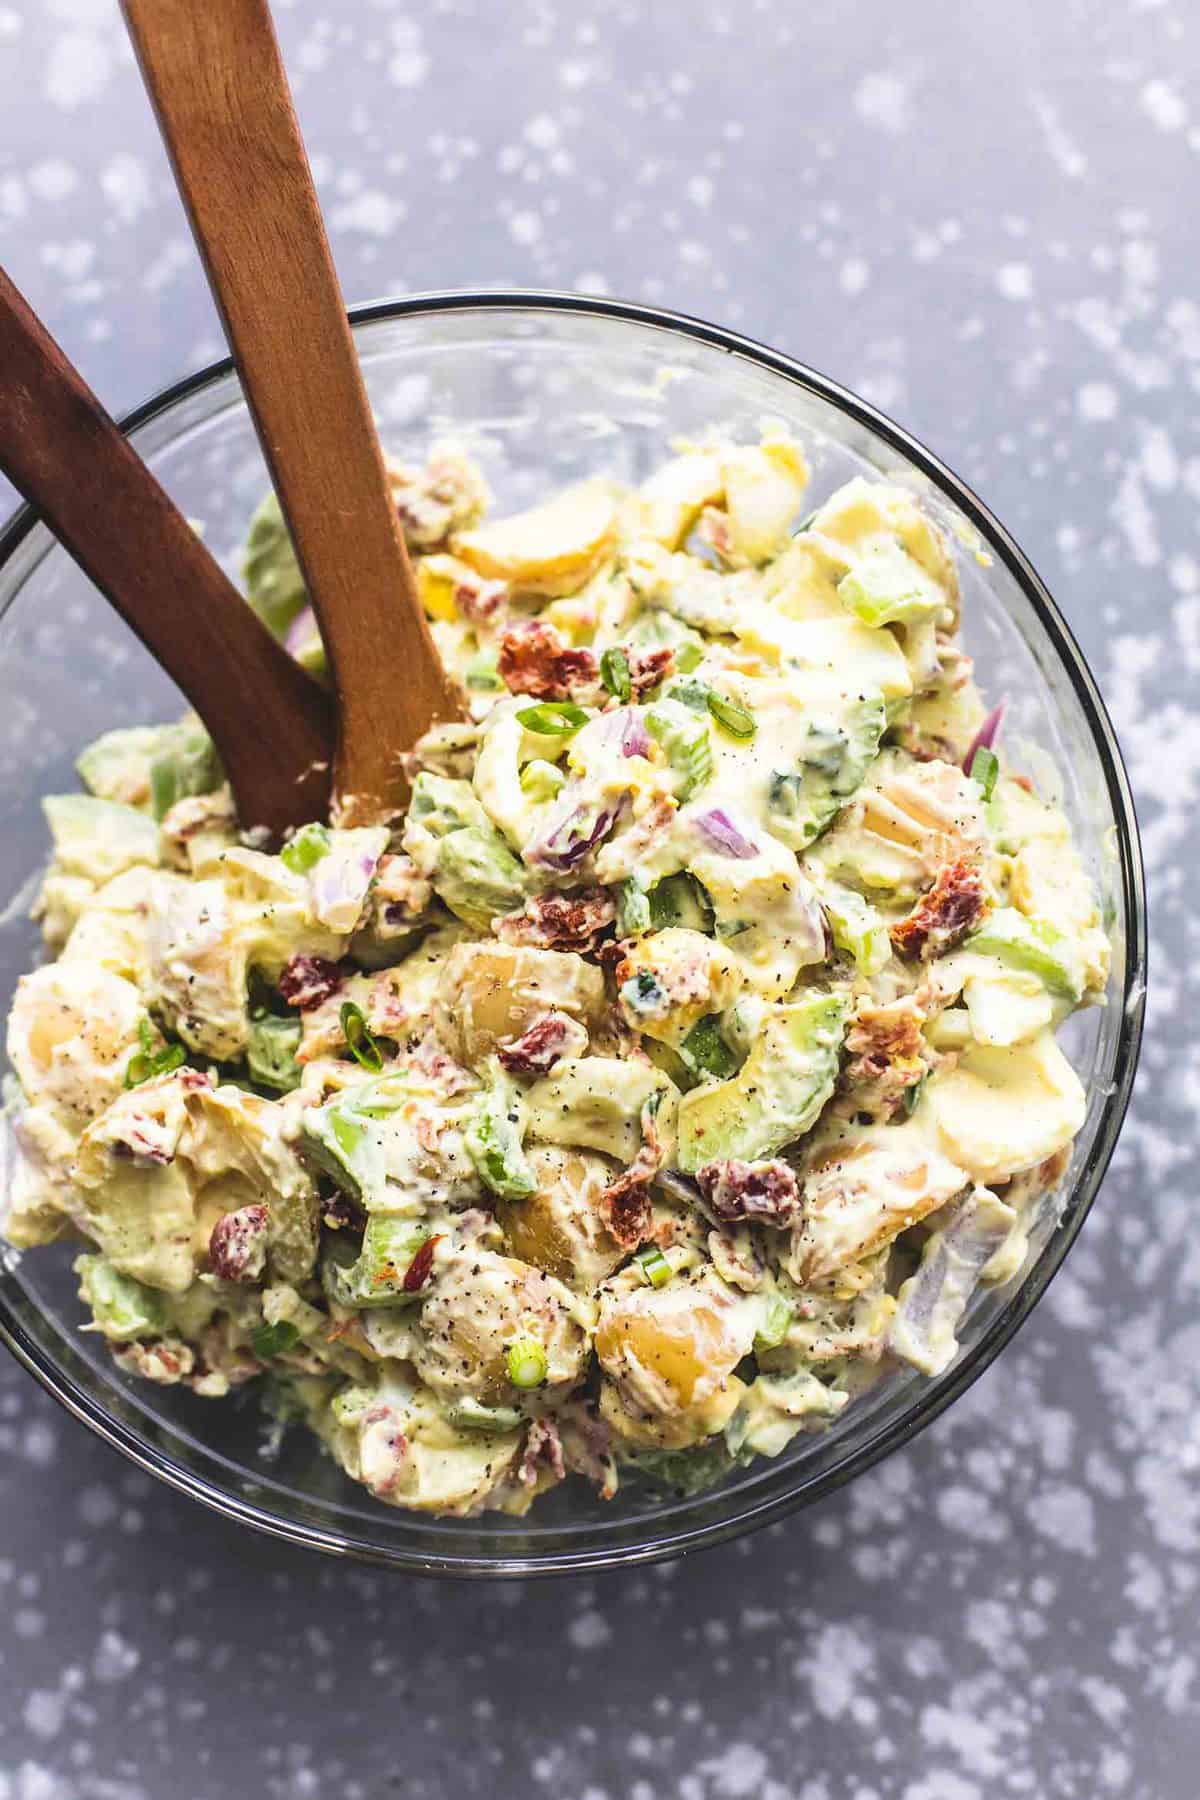 top view of bacon avocado potato salad with two wooden serving spoons in a glass bowl.